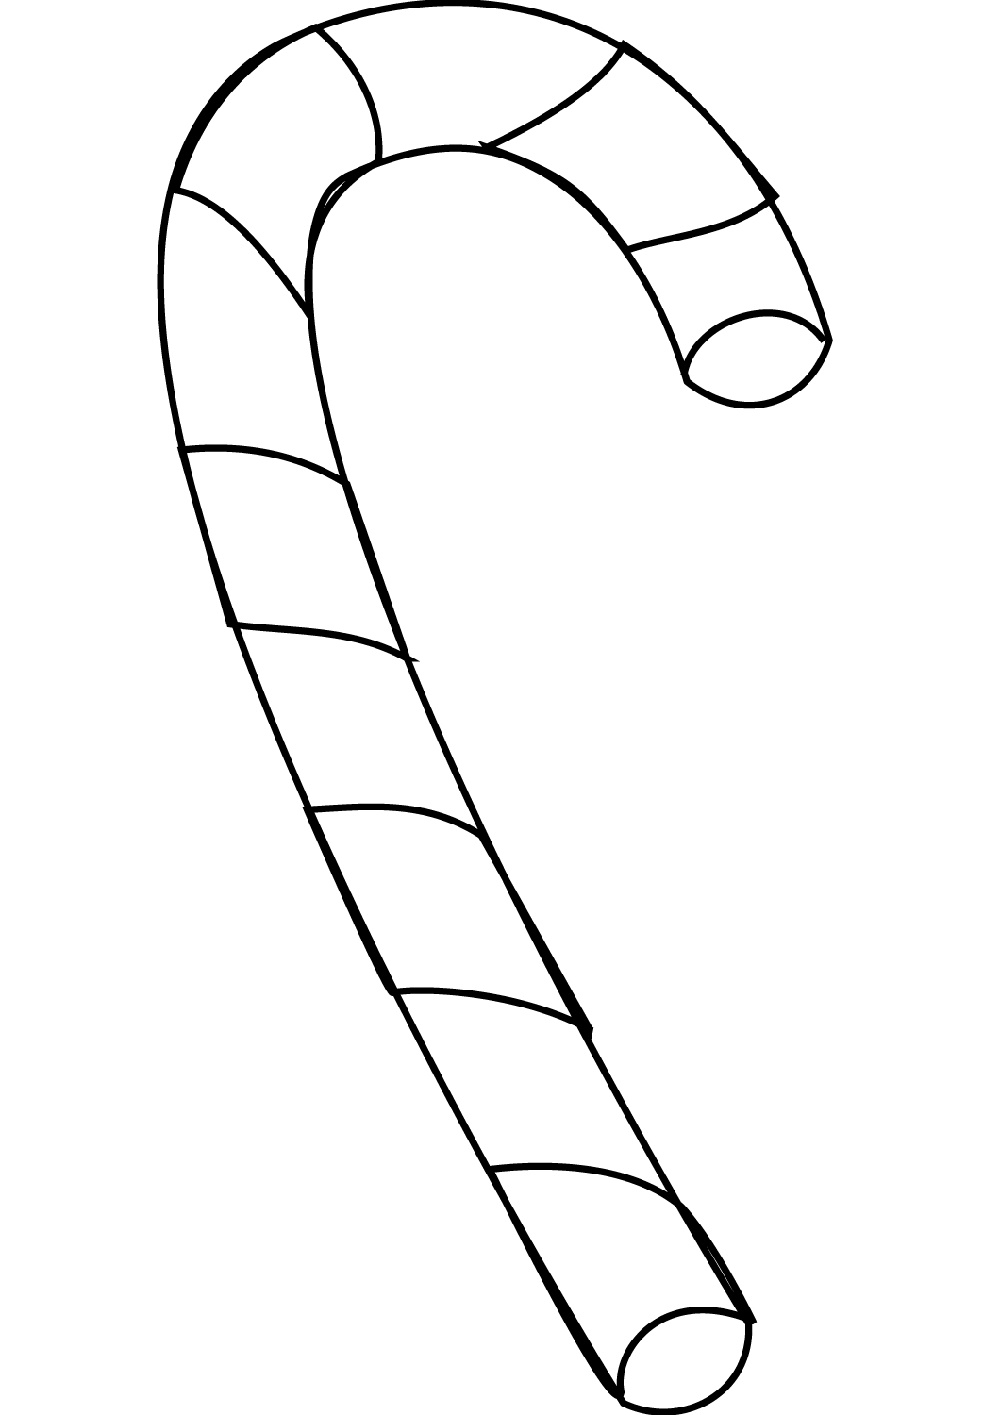 Candy Cane Coloring Page Simple